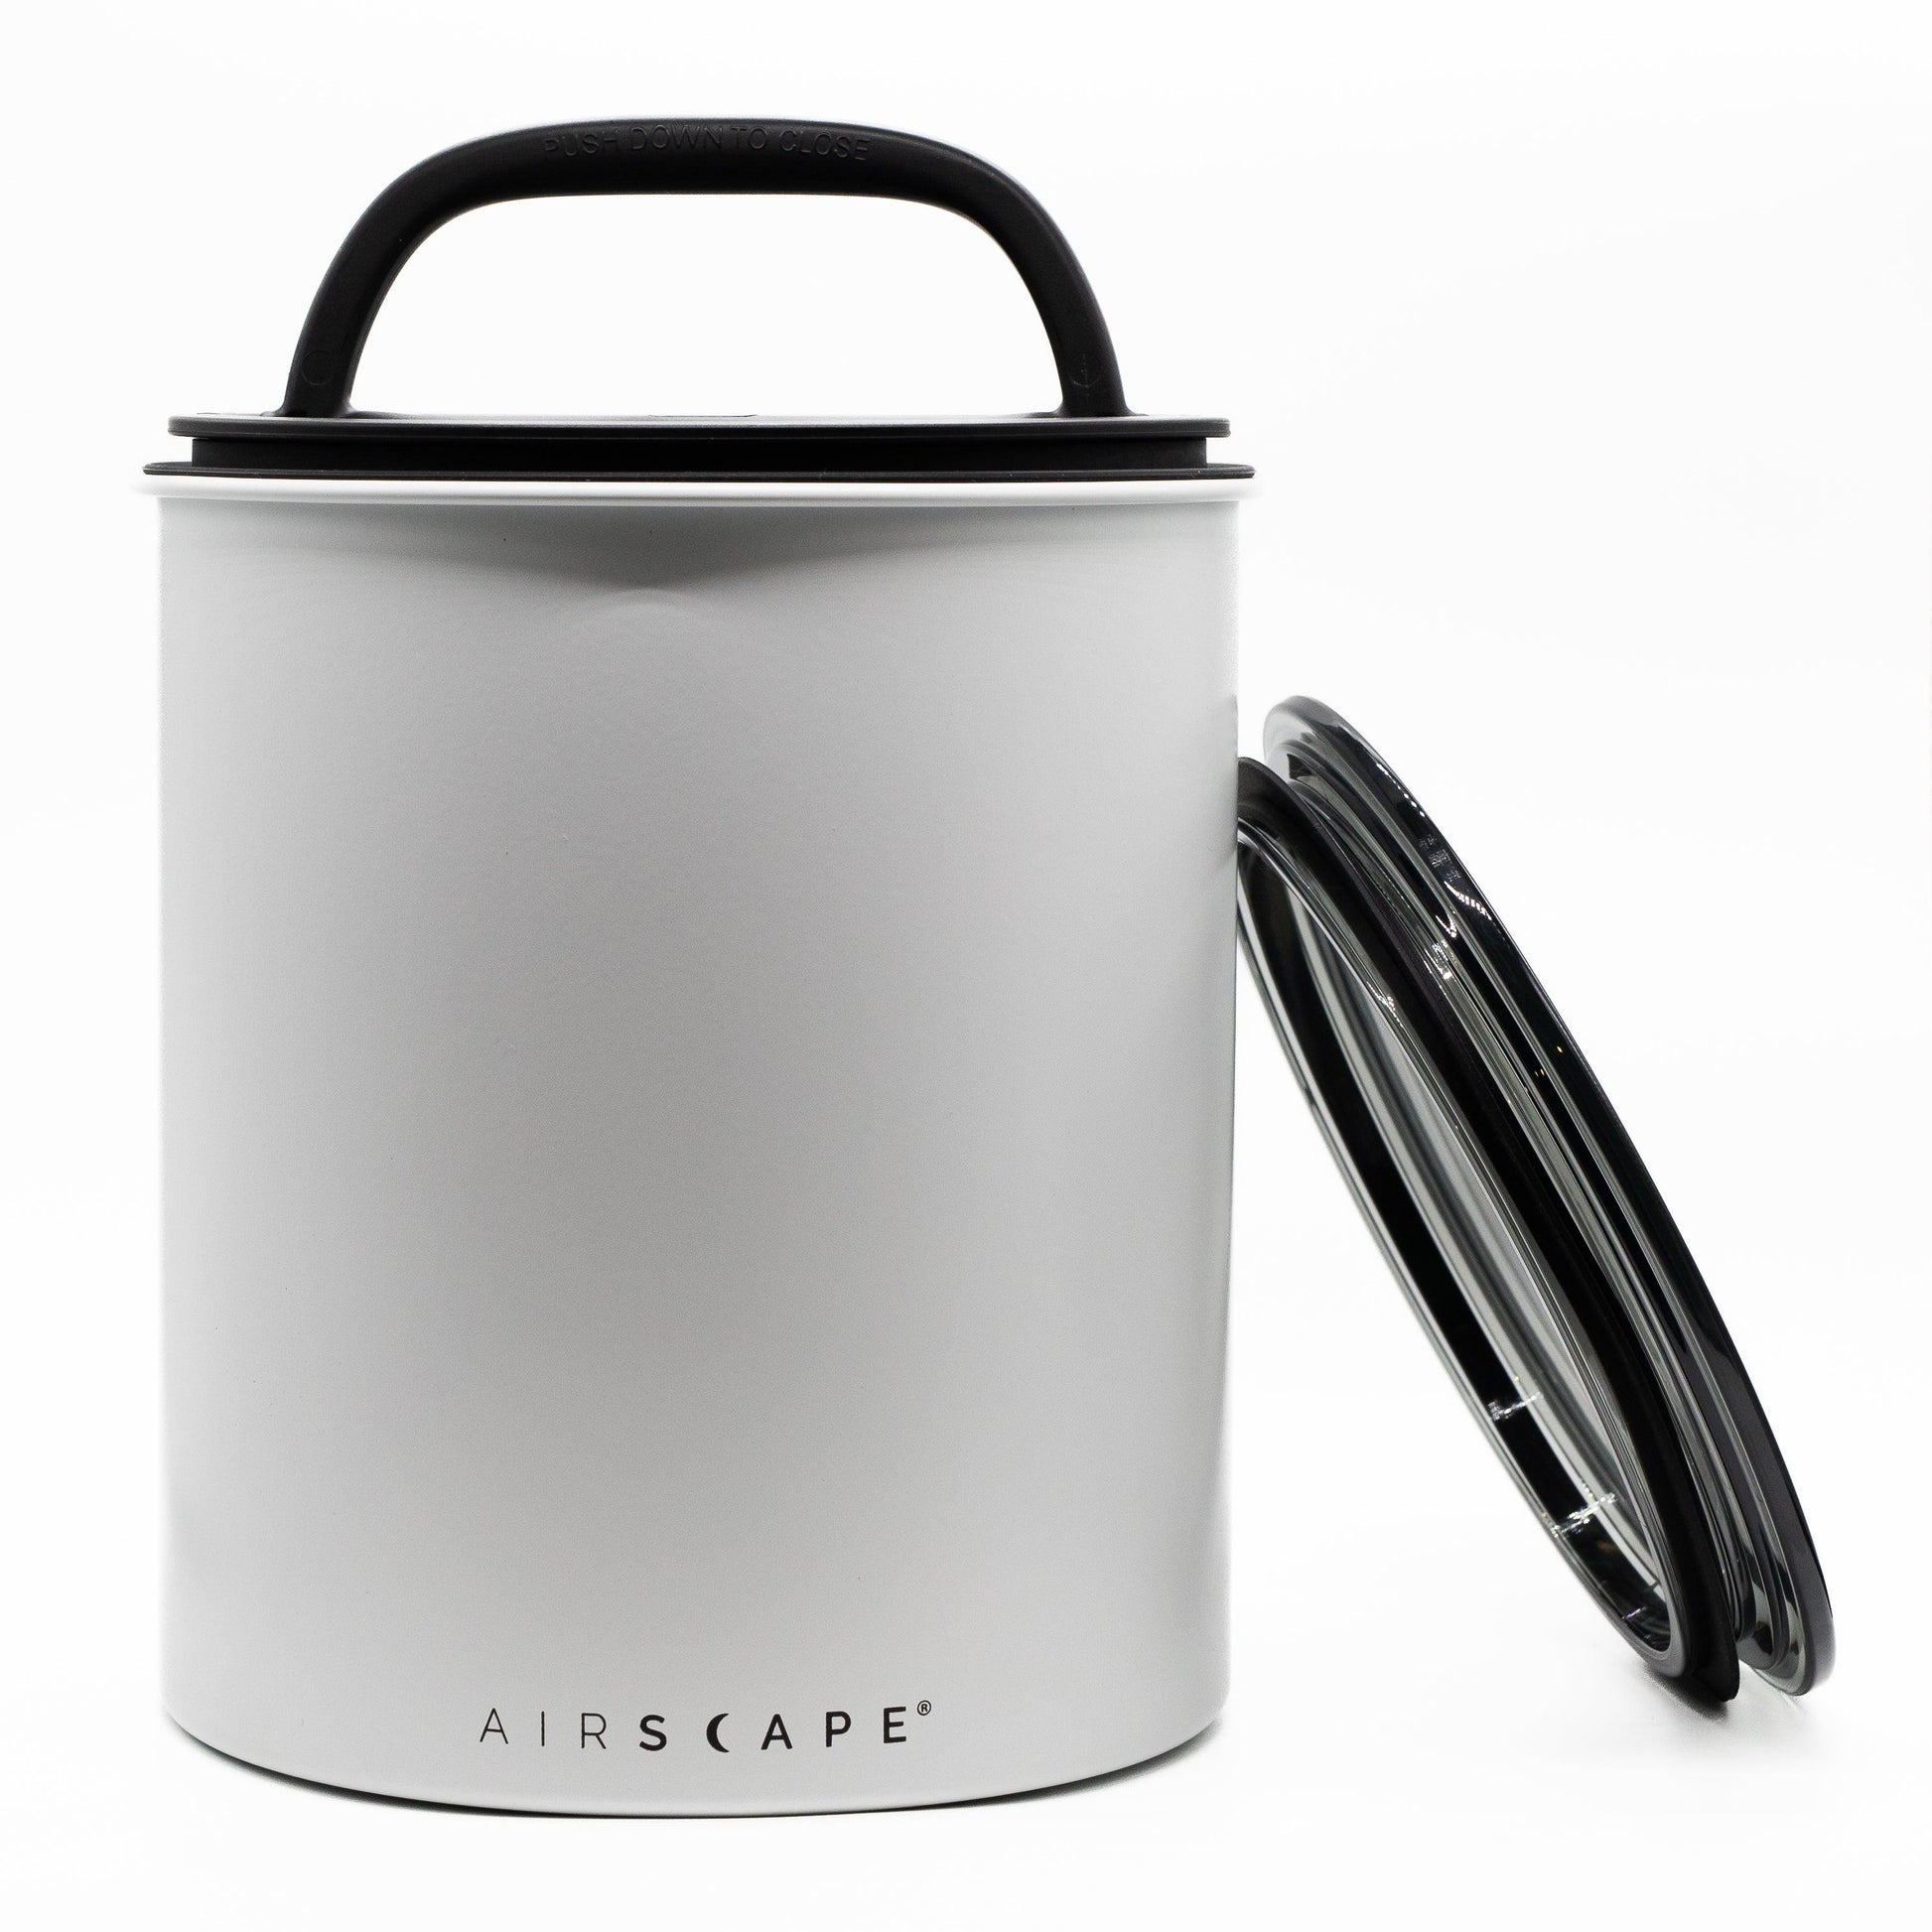 Airscape Kilo 8" Large Coffee Canister + 500g of the hustler coffee - dhc coffee co.